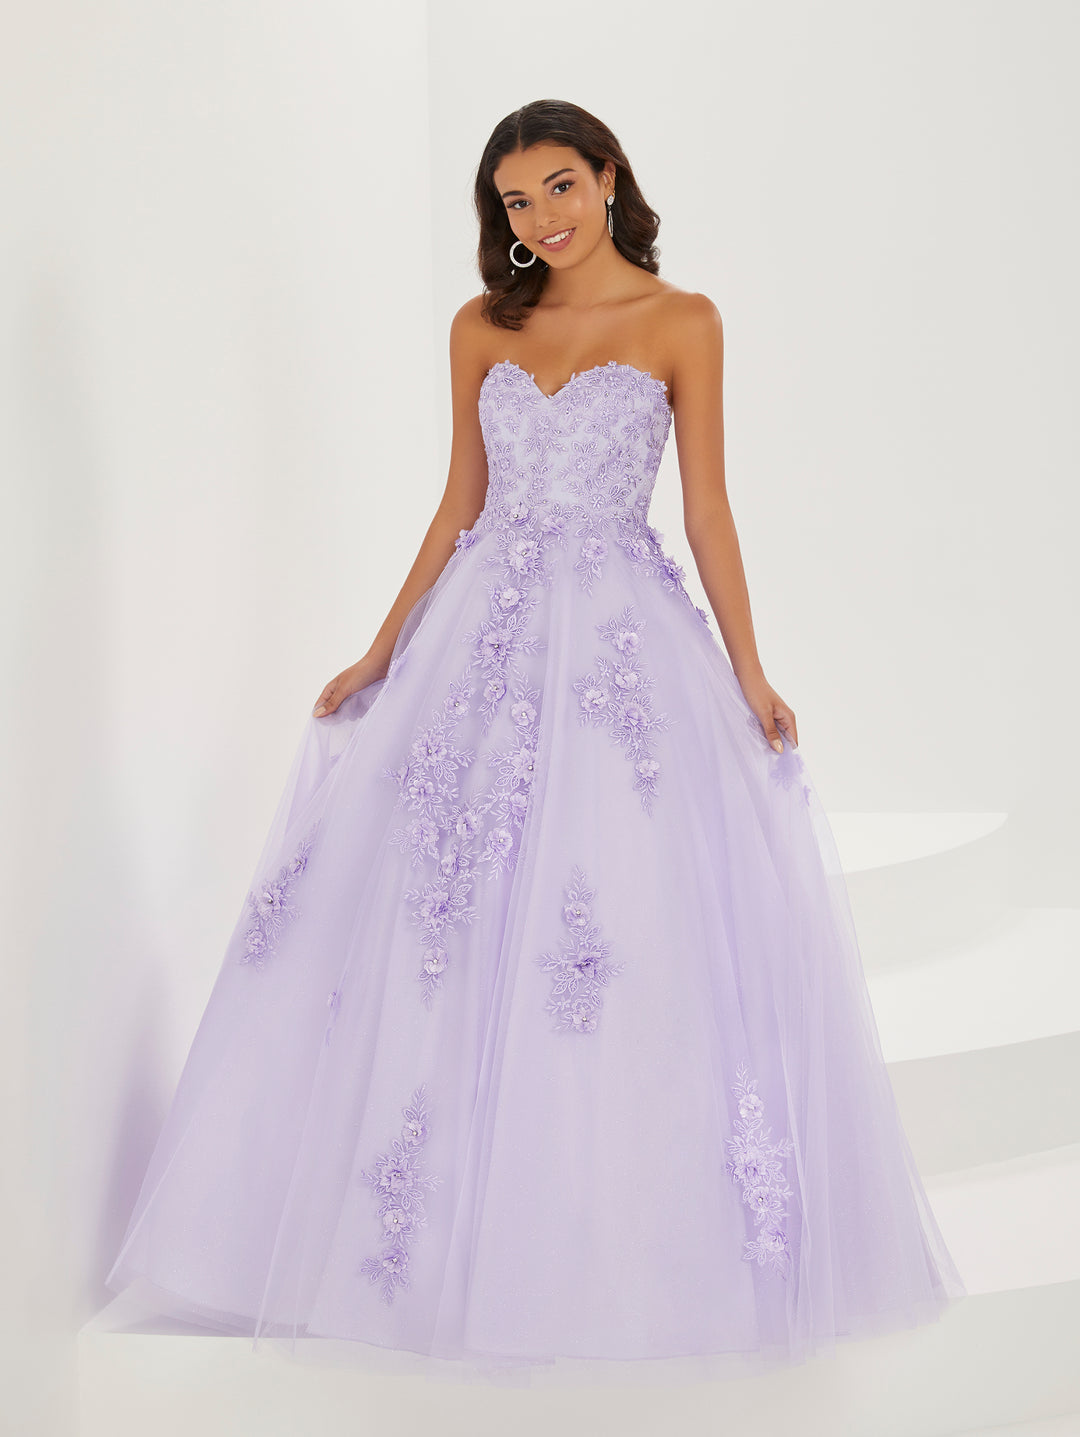 3D Floral Strapless A-line Gown by Tiffany Designs 16929